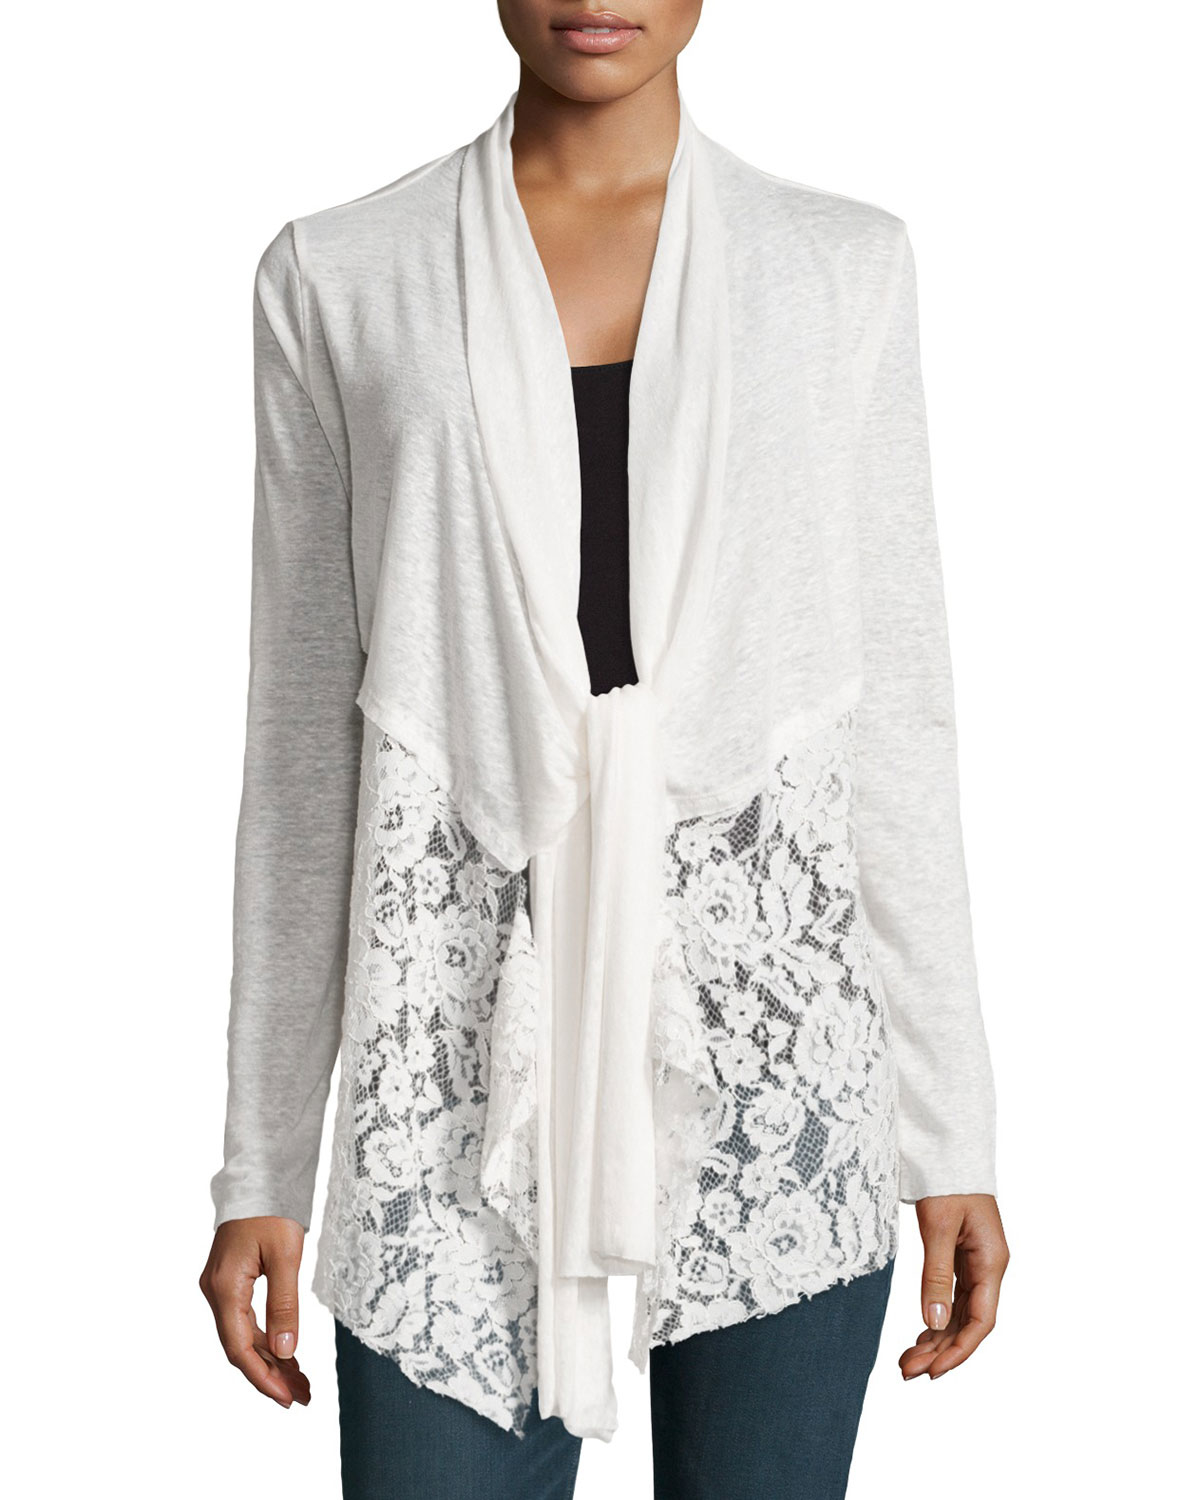 Lyst - Philosophy Long-sleeve Front-tie Cardigan in White